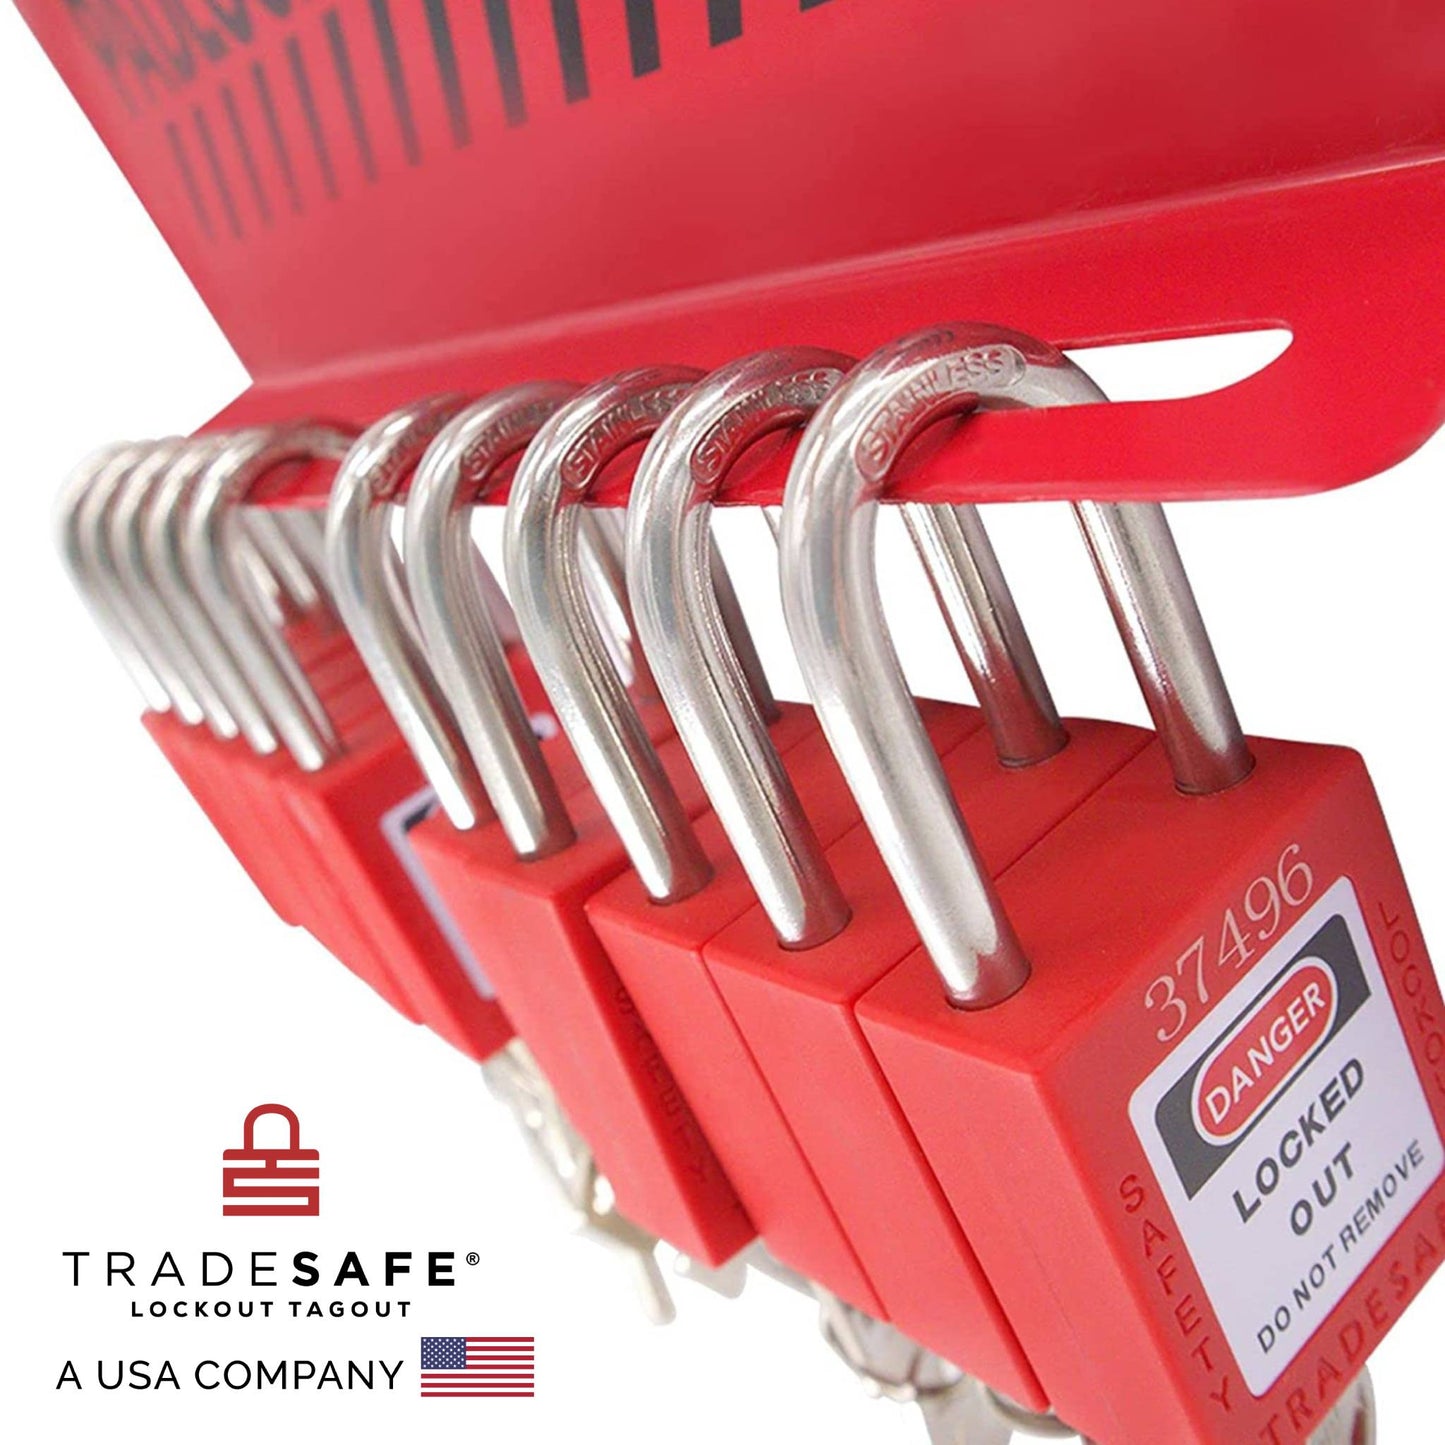 close-up view of a red padlock station stocked with 10 padlocks with 2 keys each